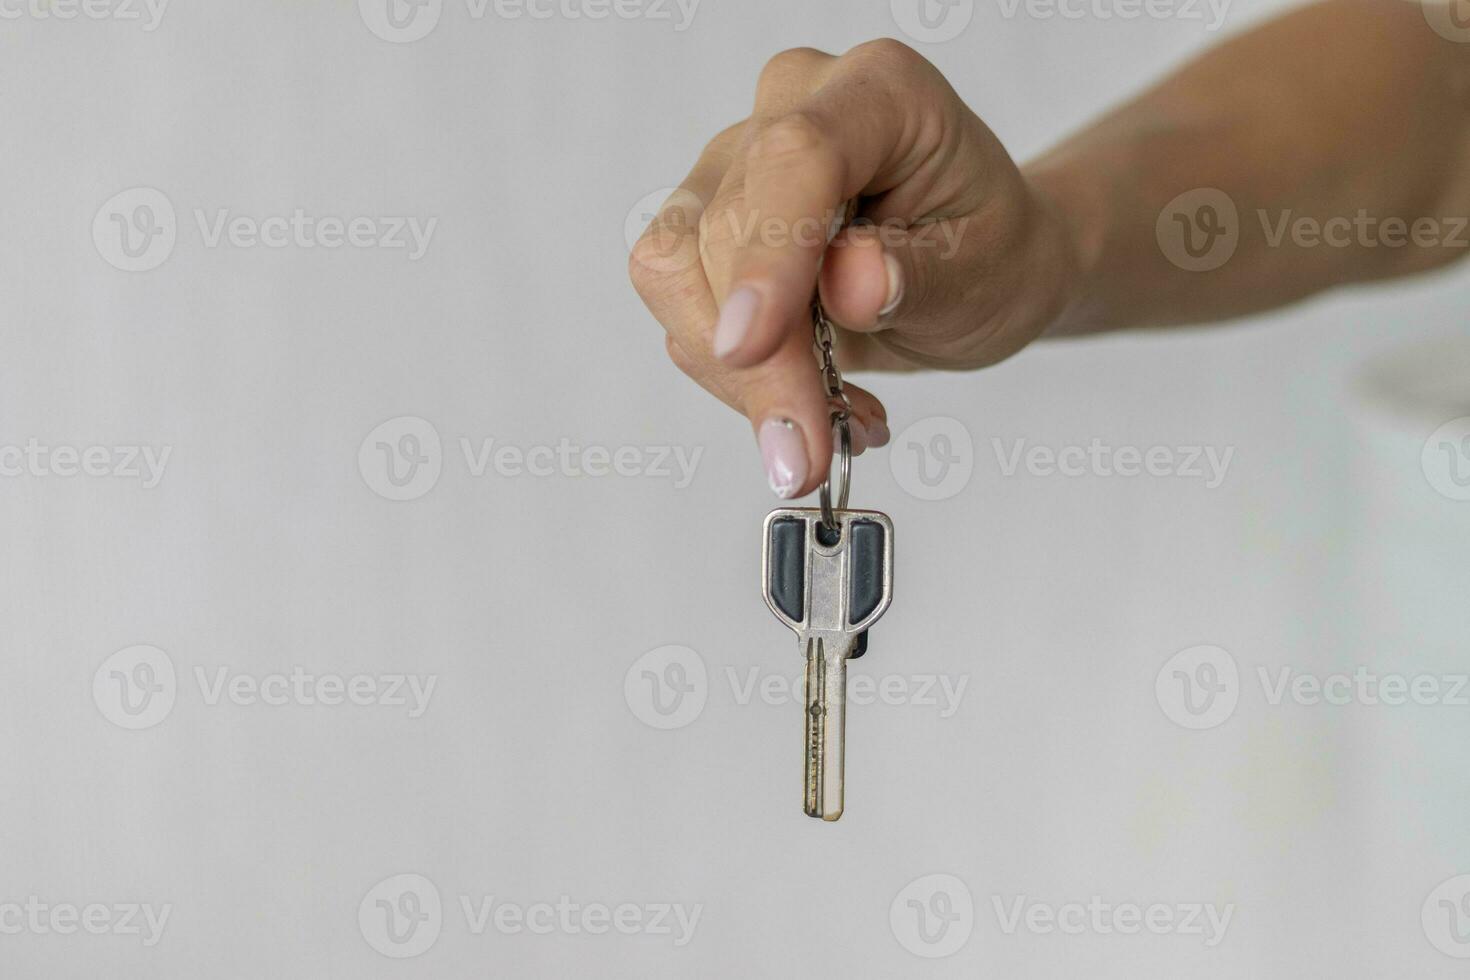 Close up shot of the woman's hand holding a key. Concept photo